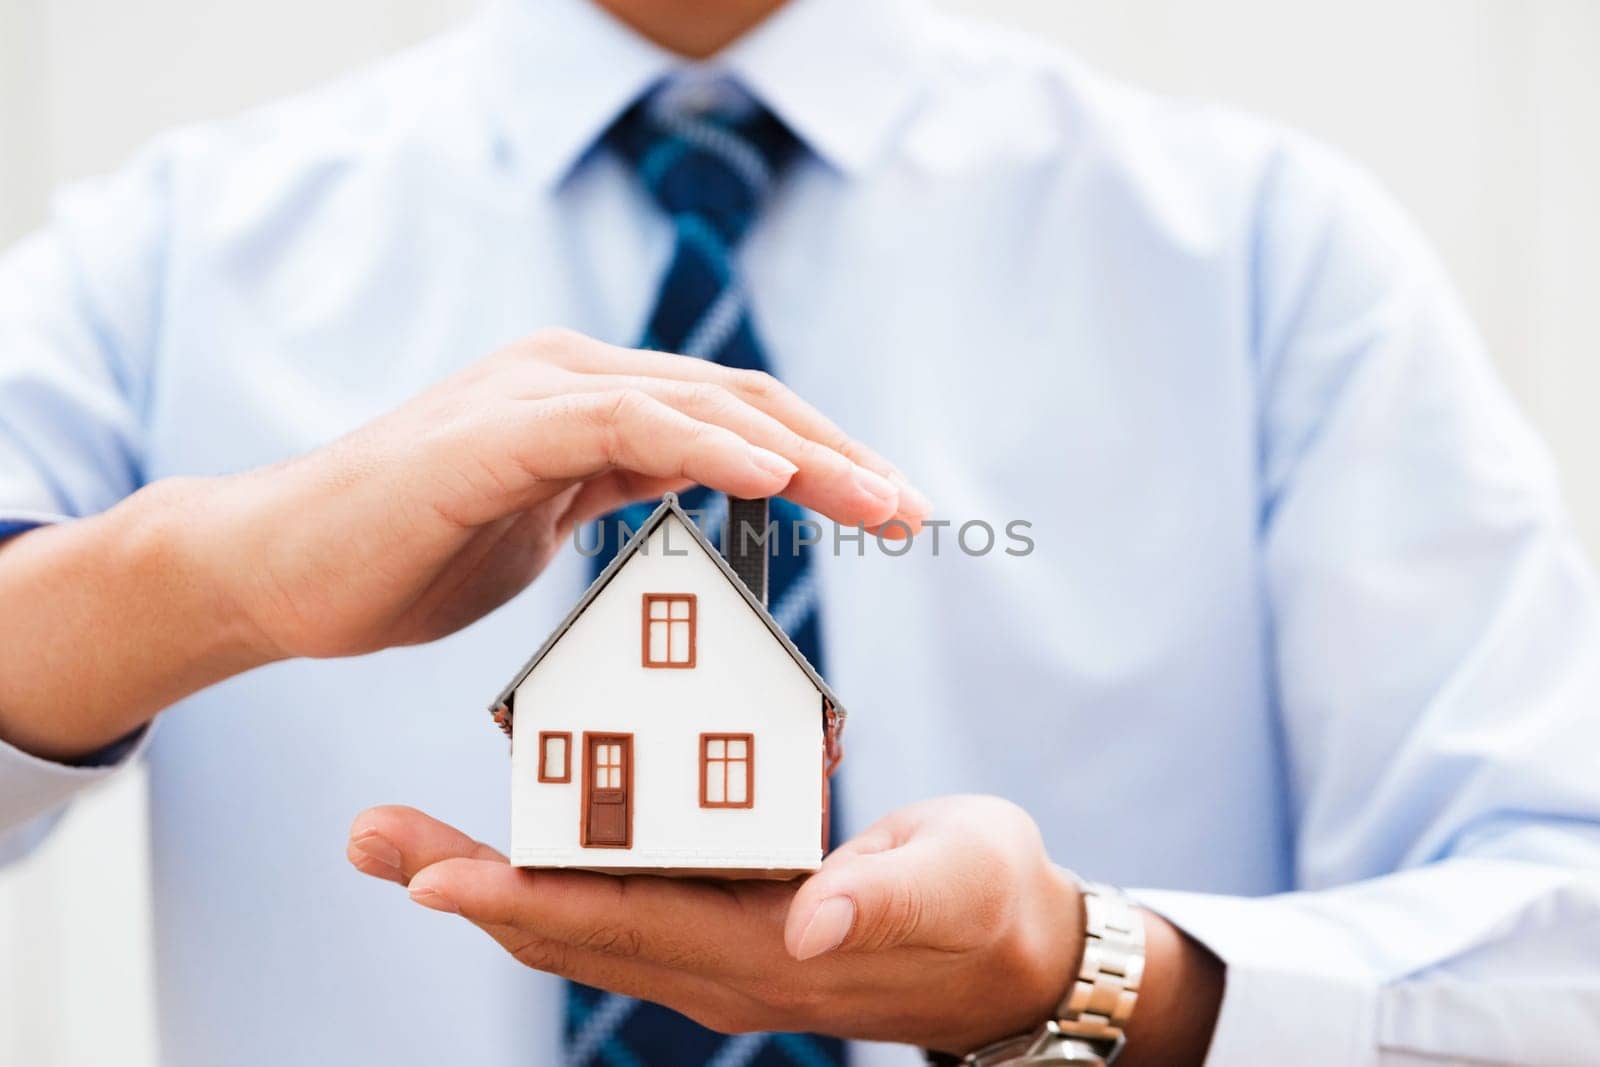 Close-Up of Hands Cradling a Model Home, Symbolizing Protection and Care in Real Estate and Property Insurance Sectors